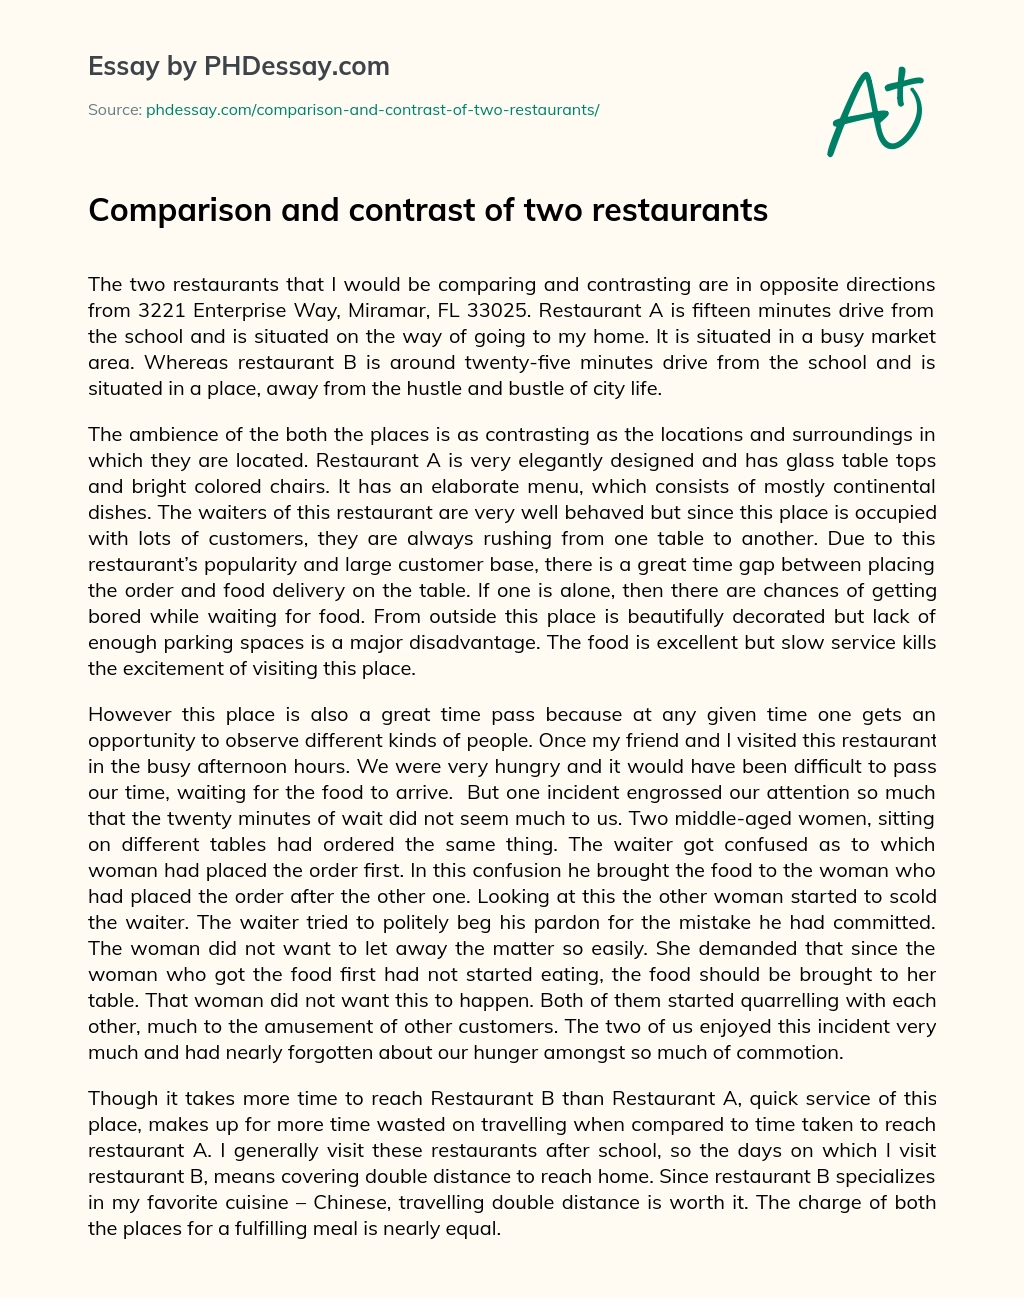 Comparison and contrast of two restaurants essay